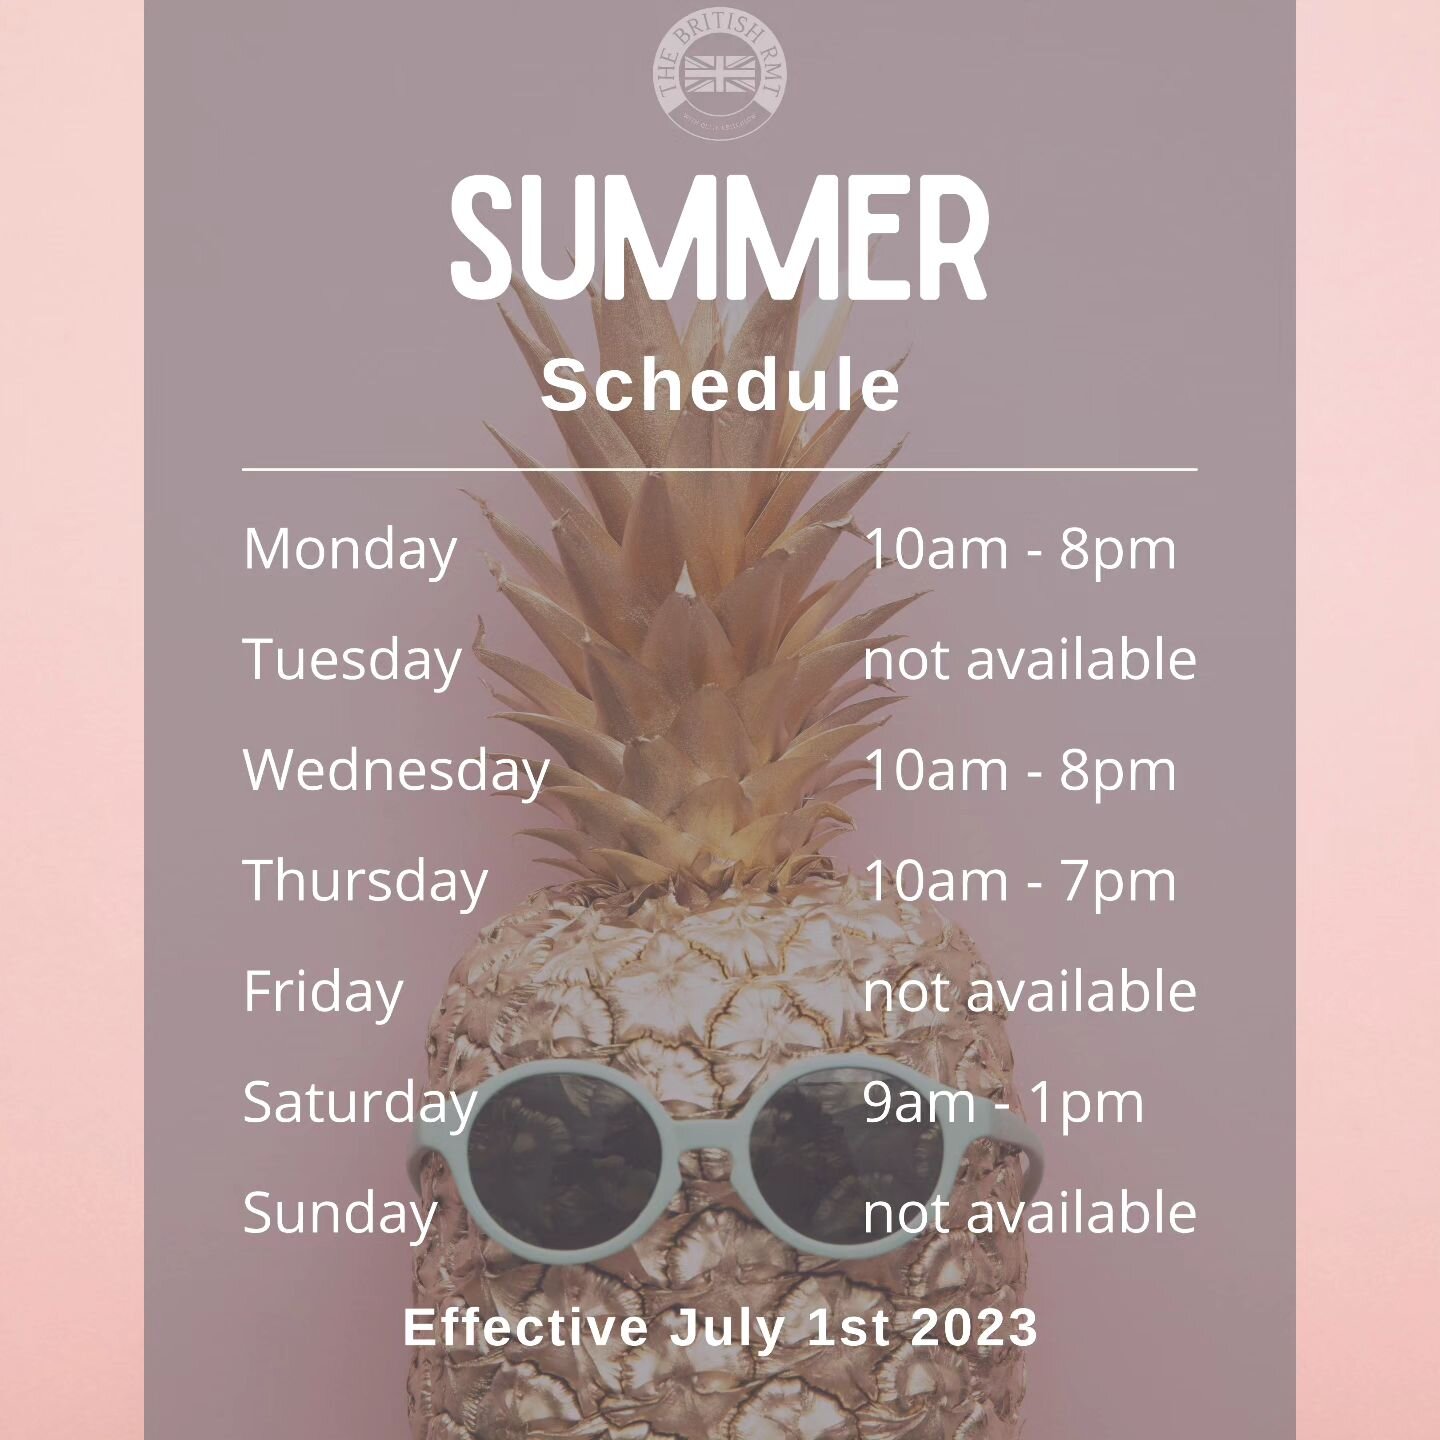 📢 New schedule with new hours... takes effect from today! 📢

Some will be happy, others may be sad... (apologies if this makes you sad 😔)

This should help fulfill the many requests for more evenings. 🥳

And at the same time, give me a little mor